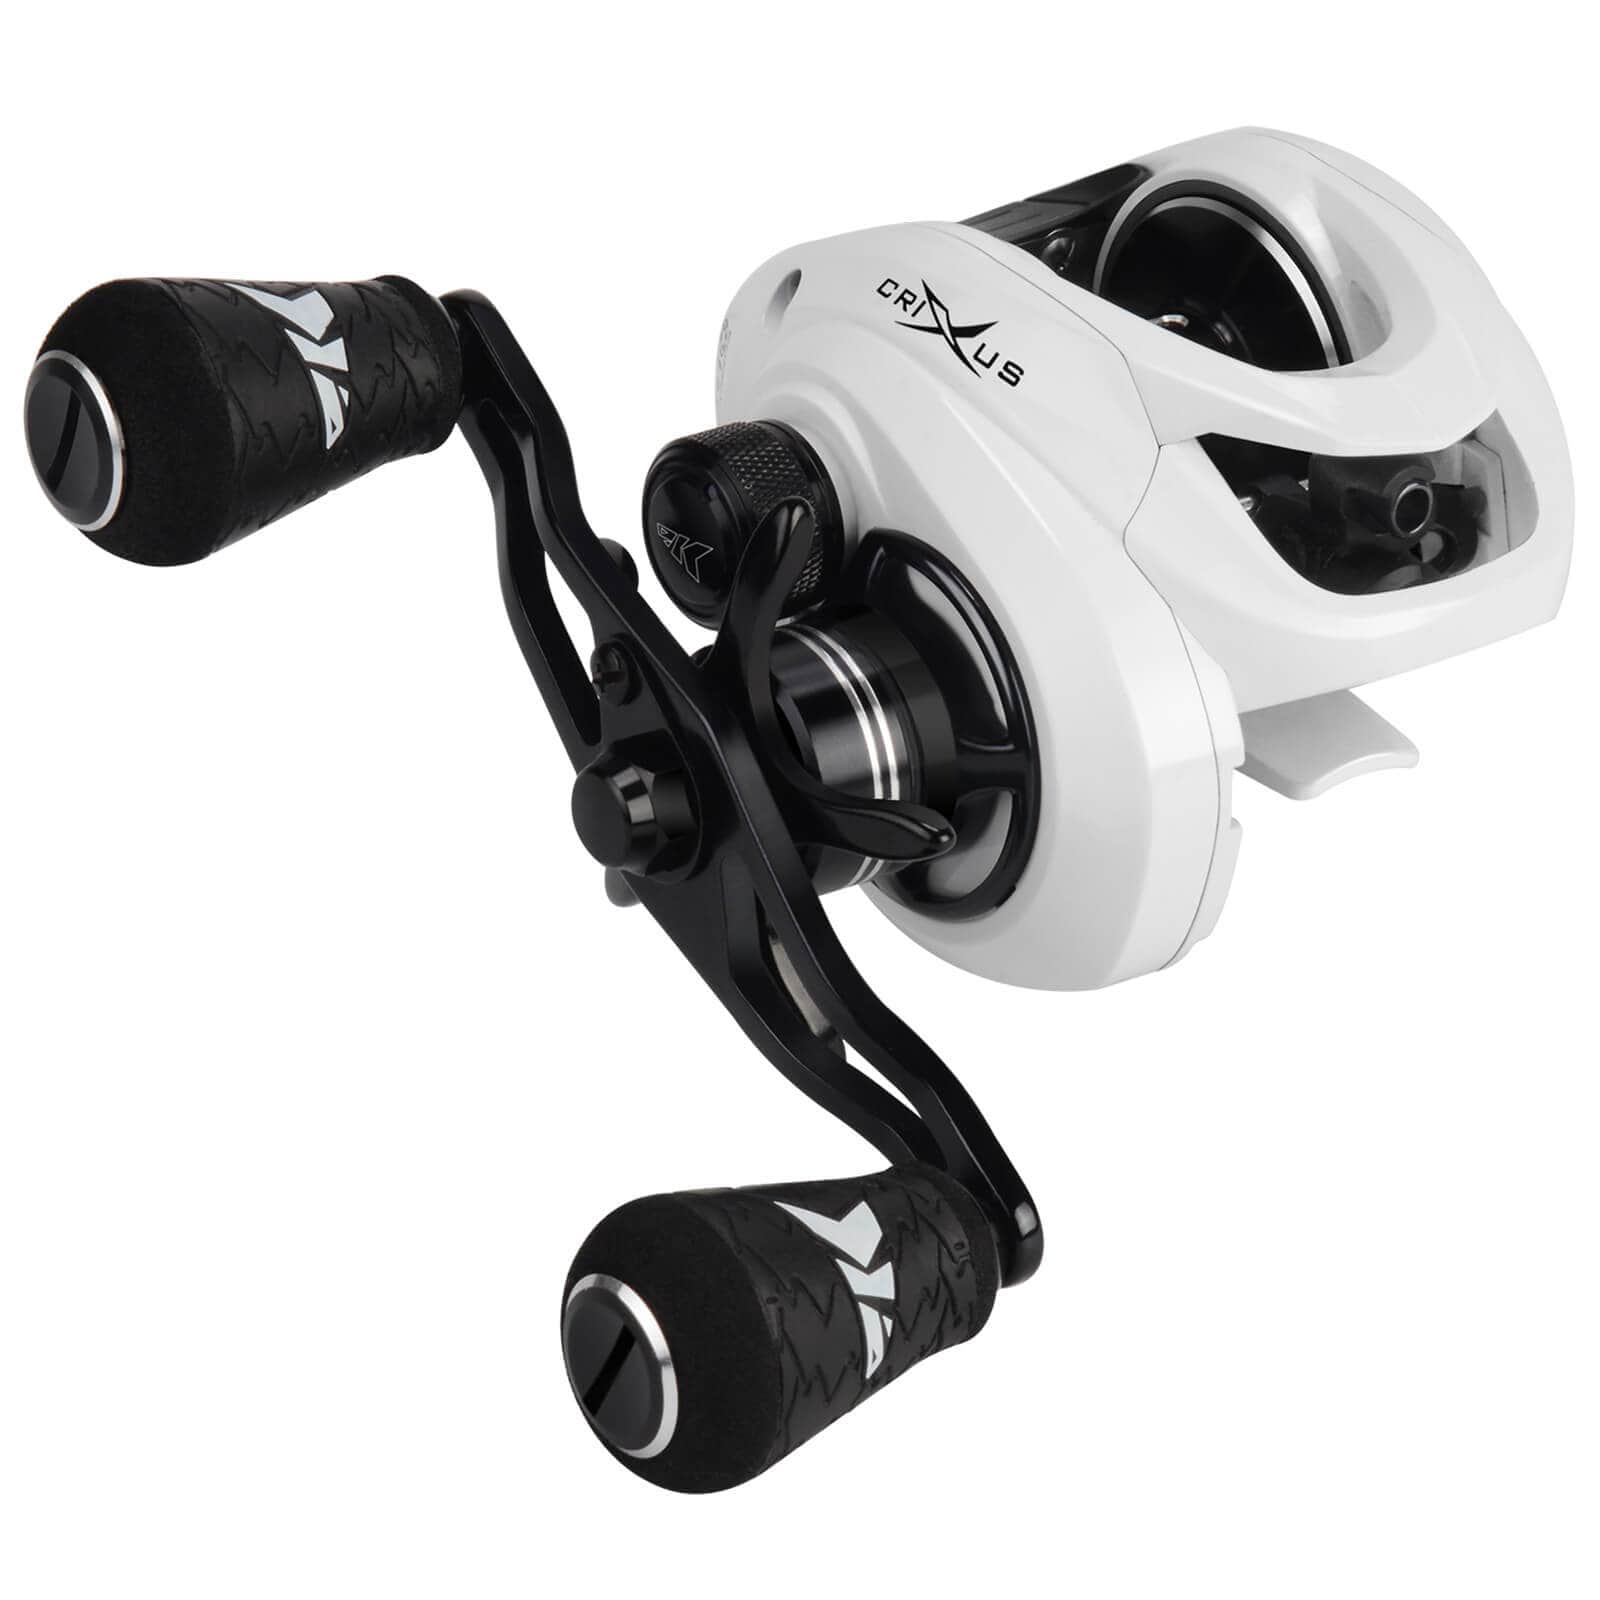 Ganis Angling World - KASTKING CRIXUS WHITE Available from R 1040.00:  www.ganis.co.za/pi32561/ci71/fishing-reels/all-fishing-reels/low-profile- bait-casting-reels/kastking-crixus-white.html Low Profile Baitcasting  Fishing Reel– Fish like a gladiator